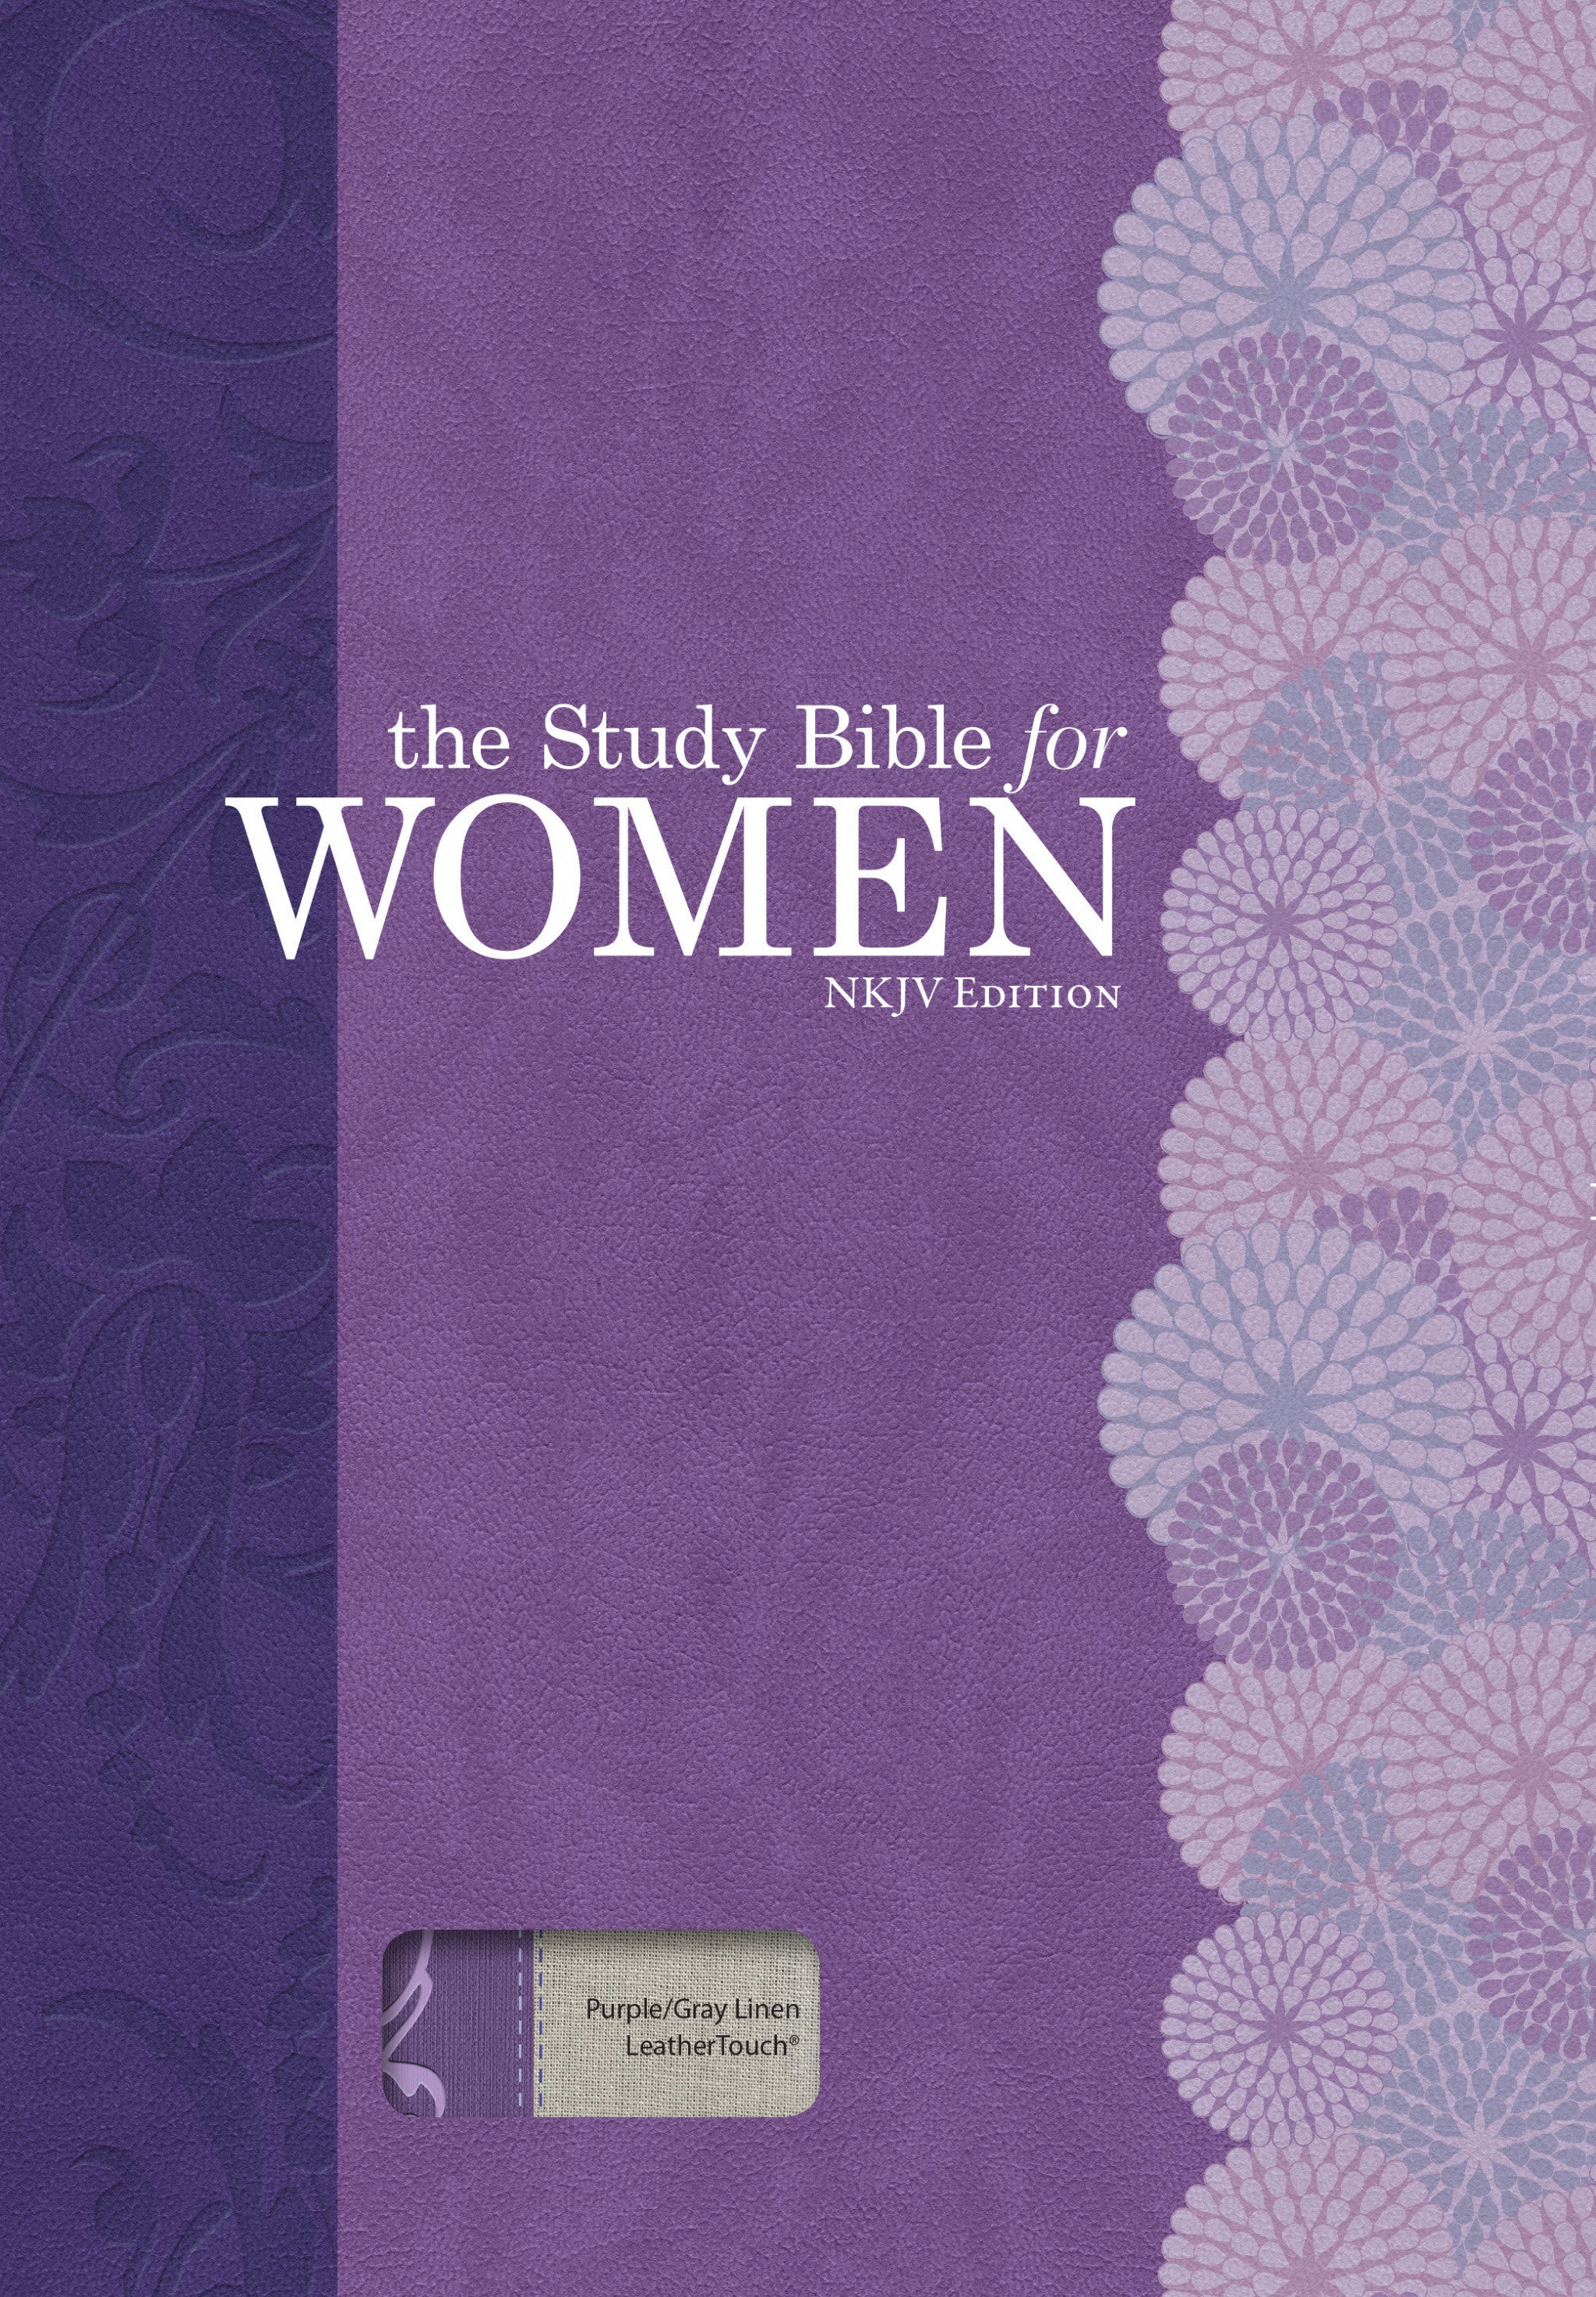 Image of NKJV Study Bible For Women, Purple/Grey Linen, Indexed L/l other